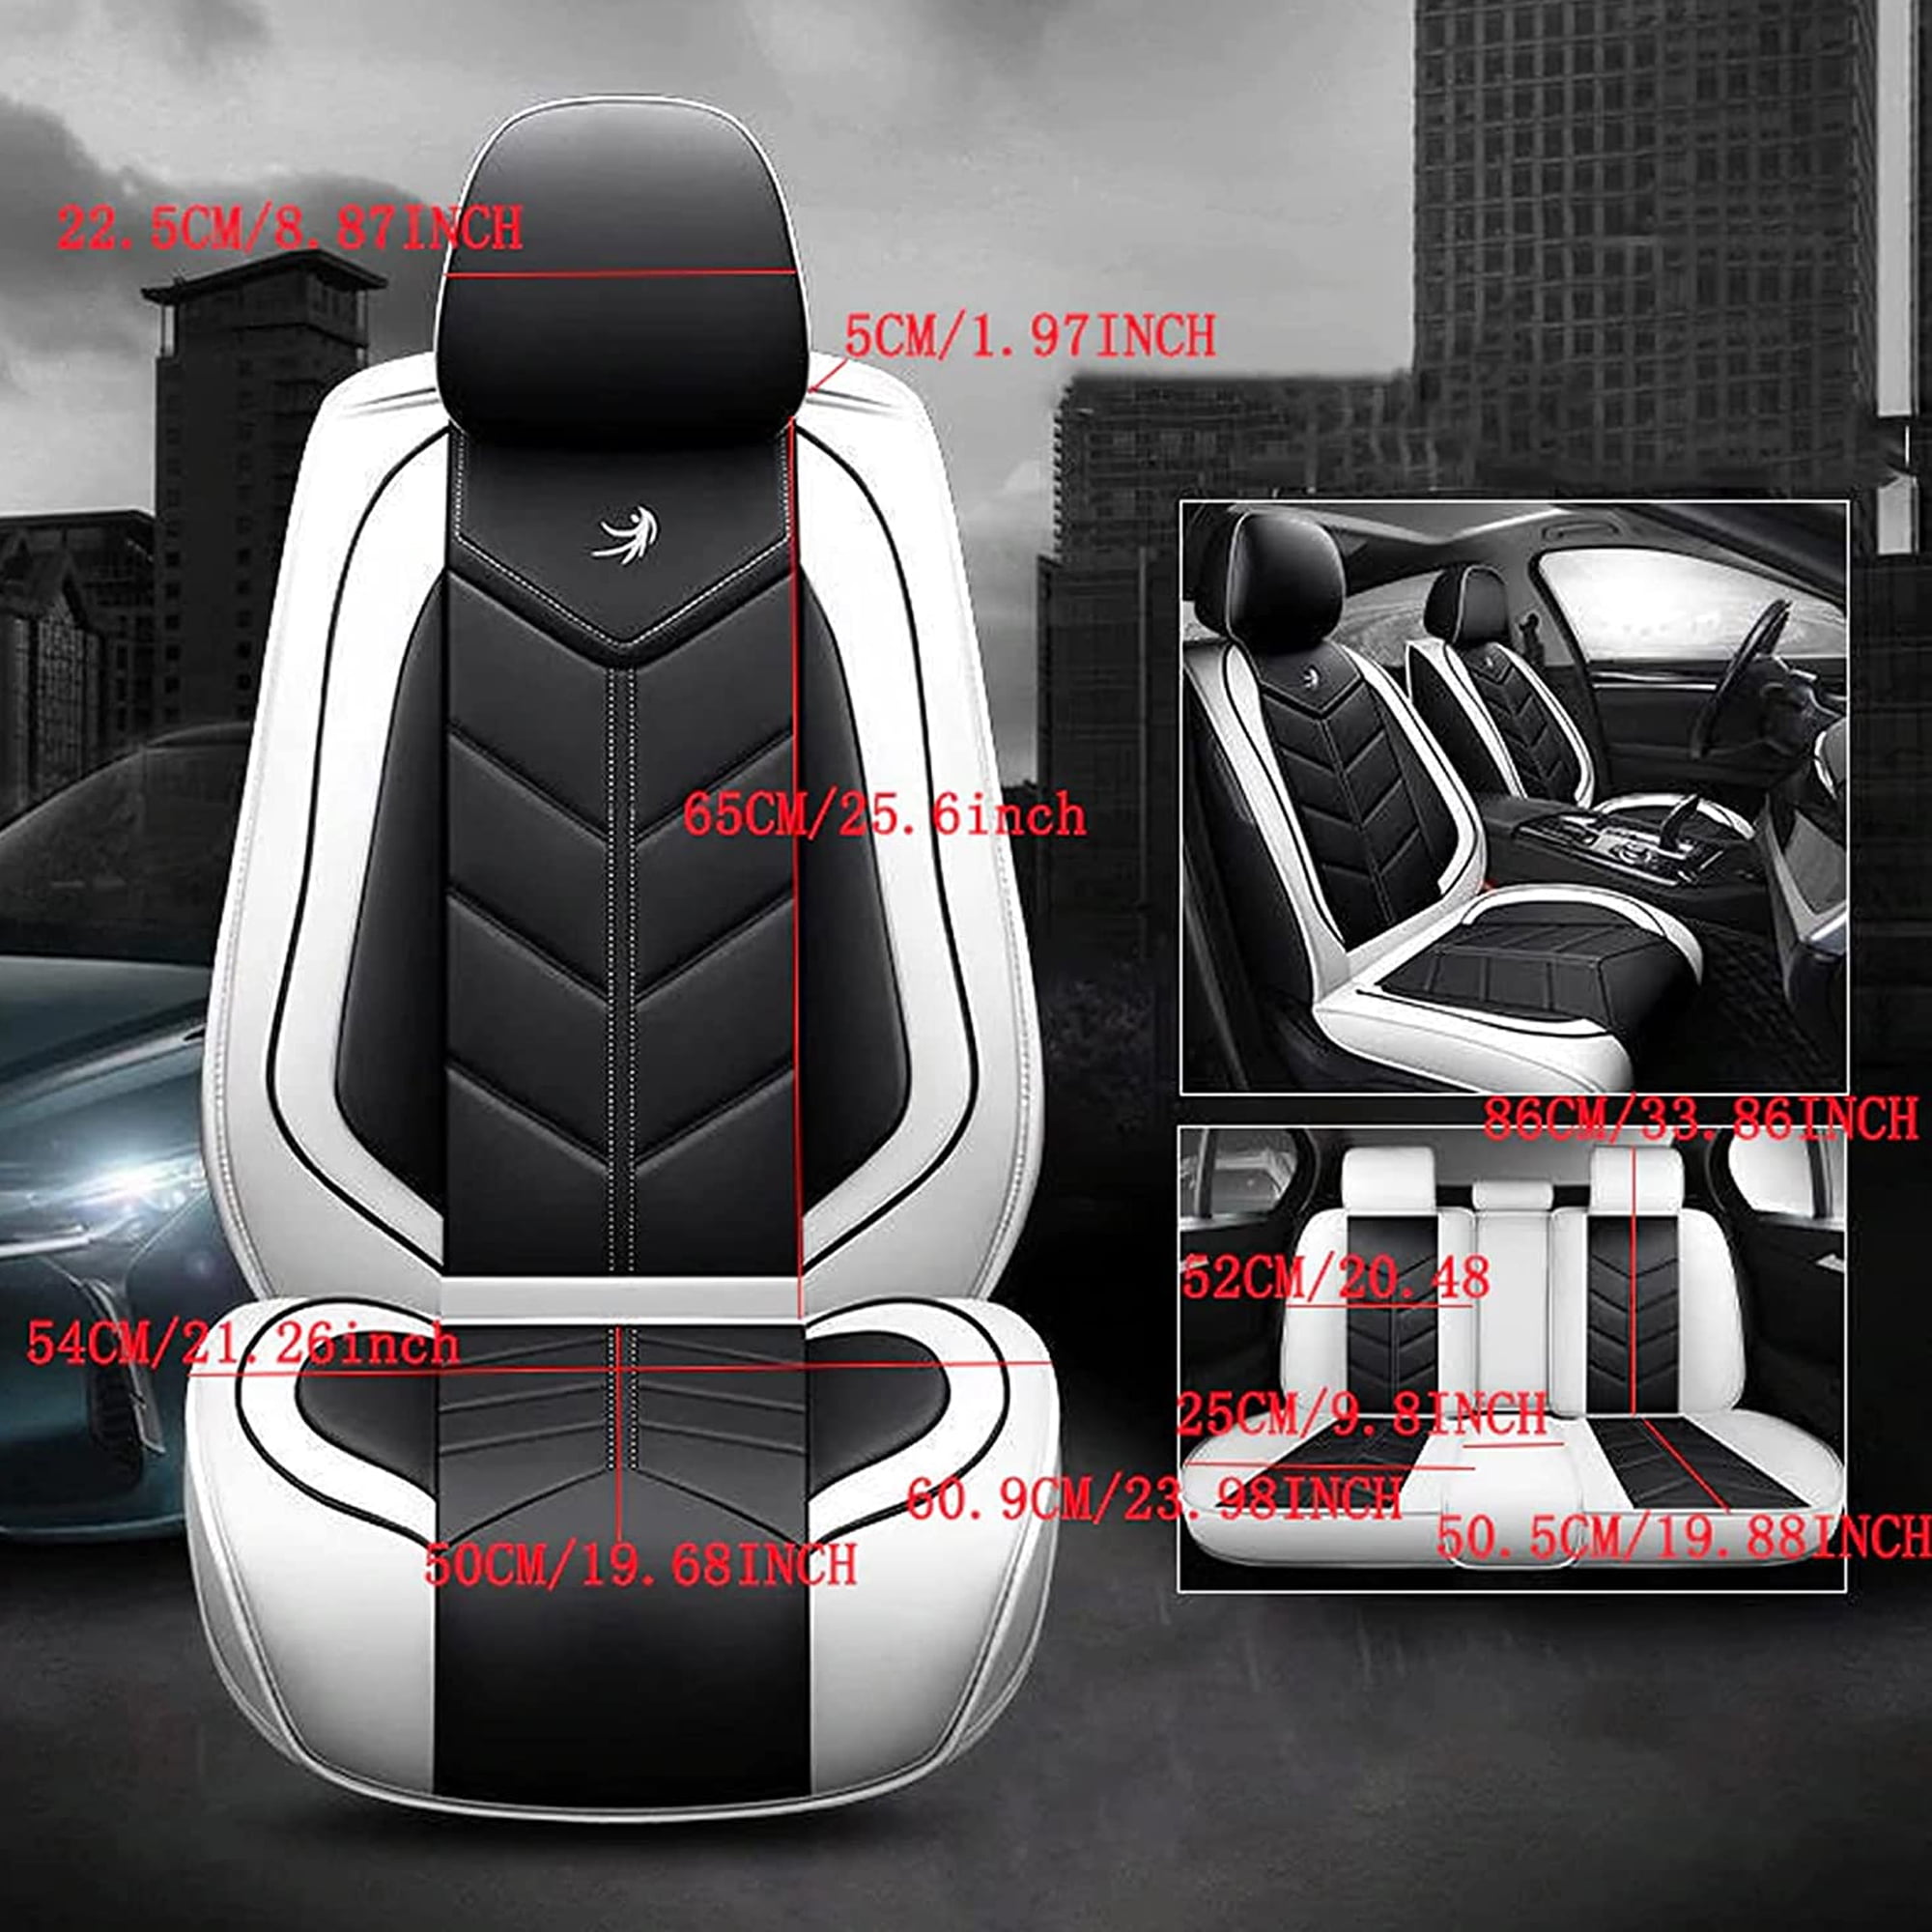 Car Seat Covers Durable Leather Universal Five Seats Set Cushion Mats For 5  Seat Seater Car Fashion 0382758 From Ai826, $171.86